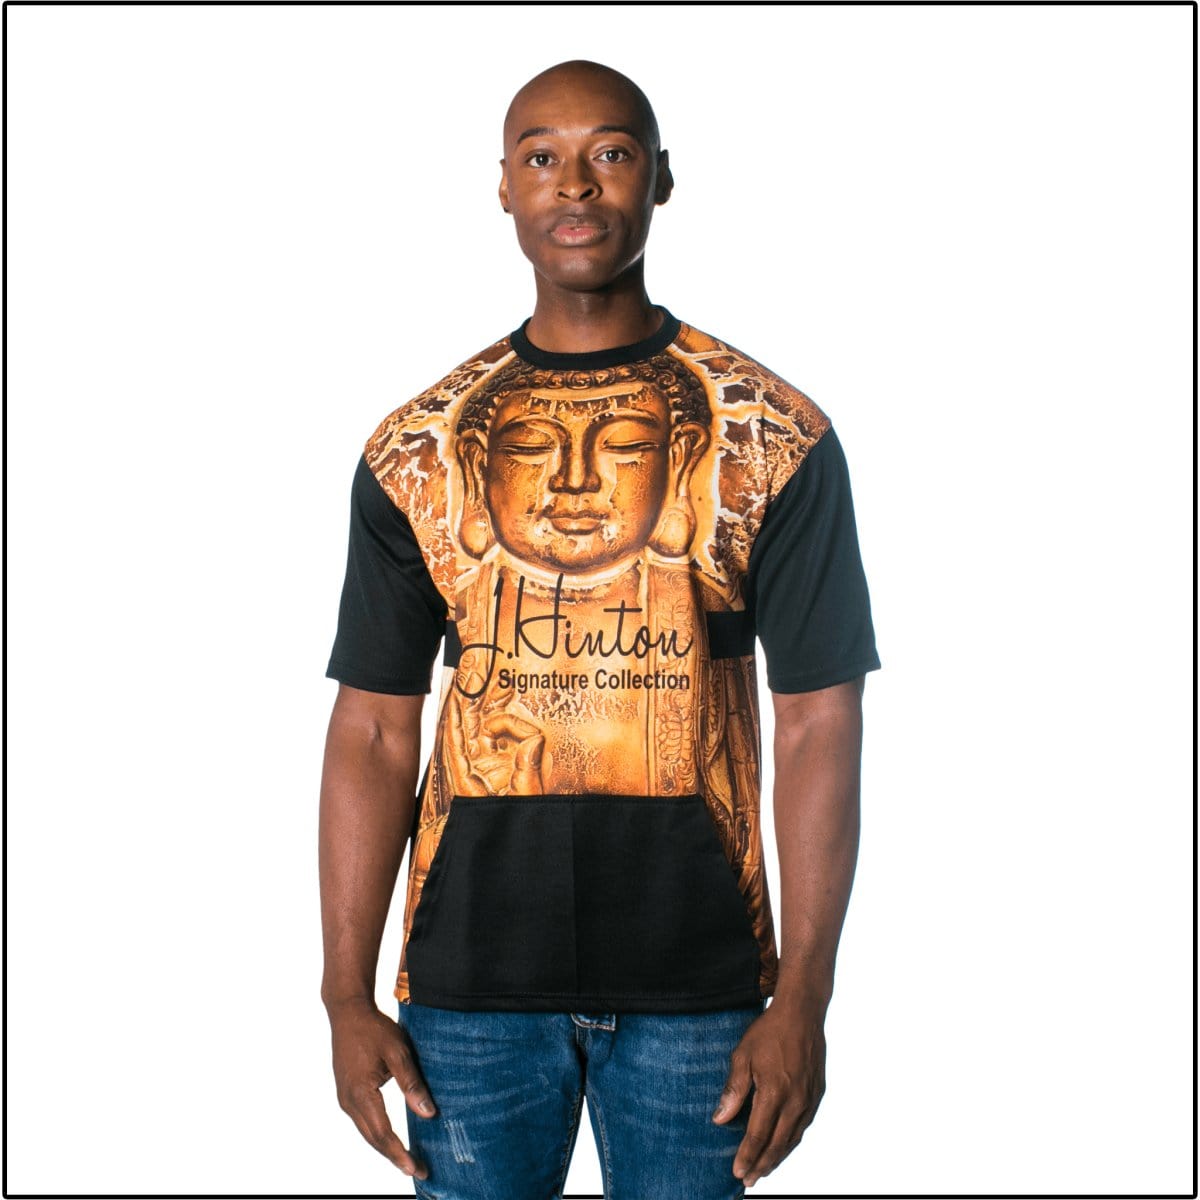 J.Hinton Collections Apparel & Accessories Jhinton Buddha